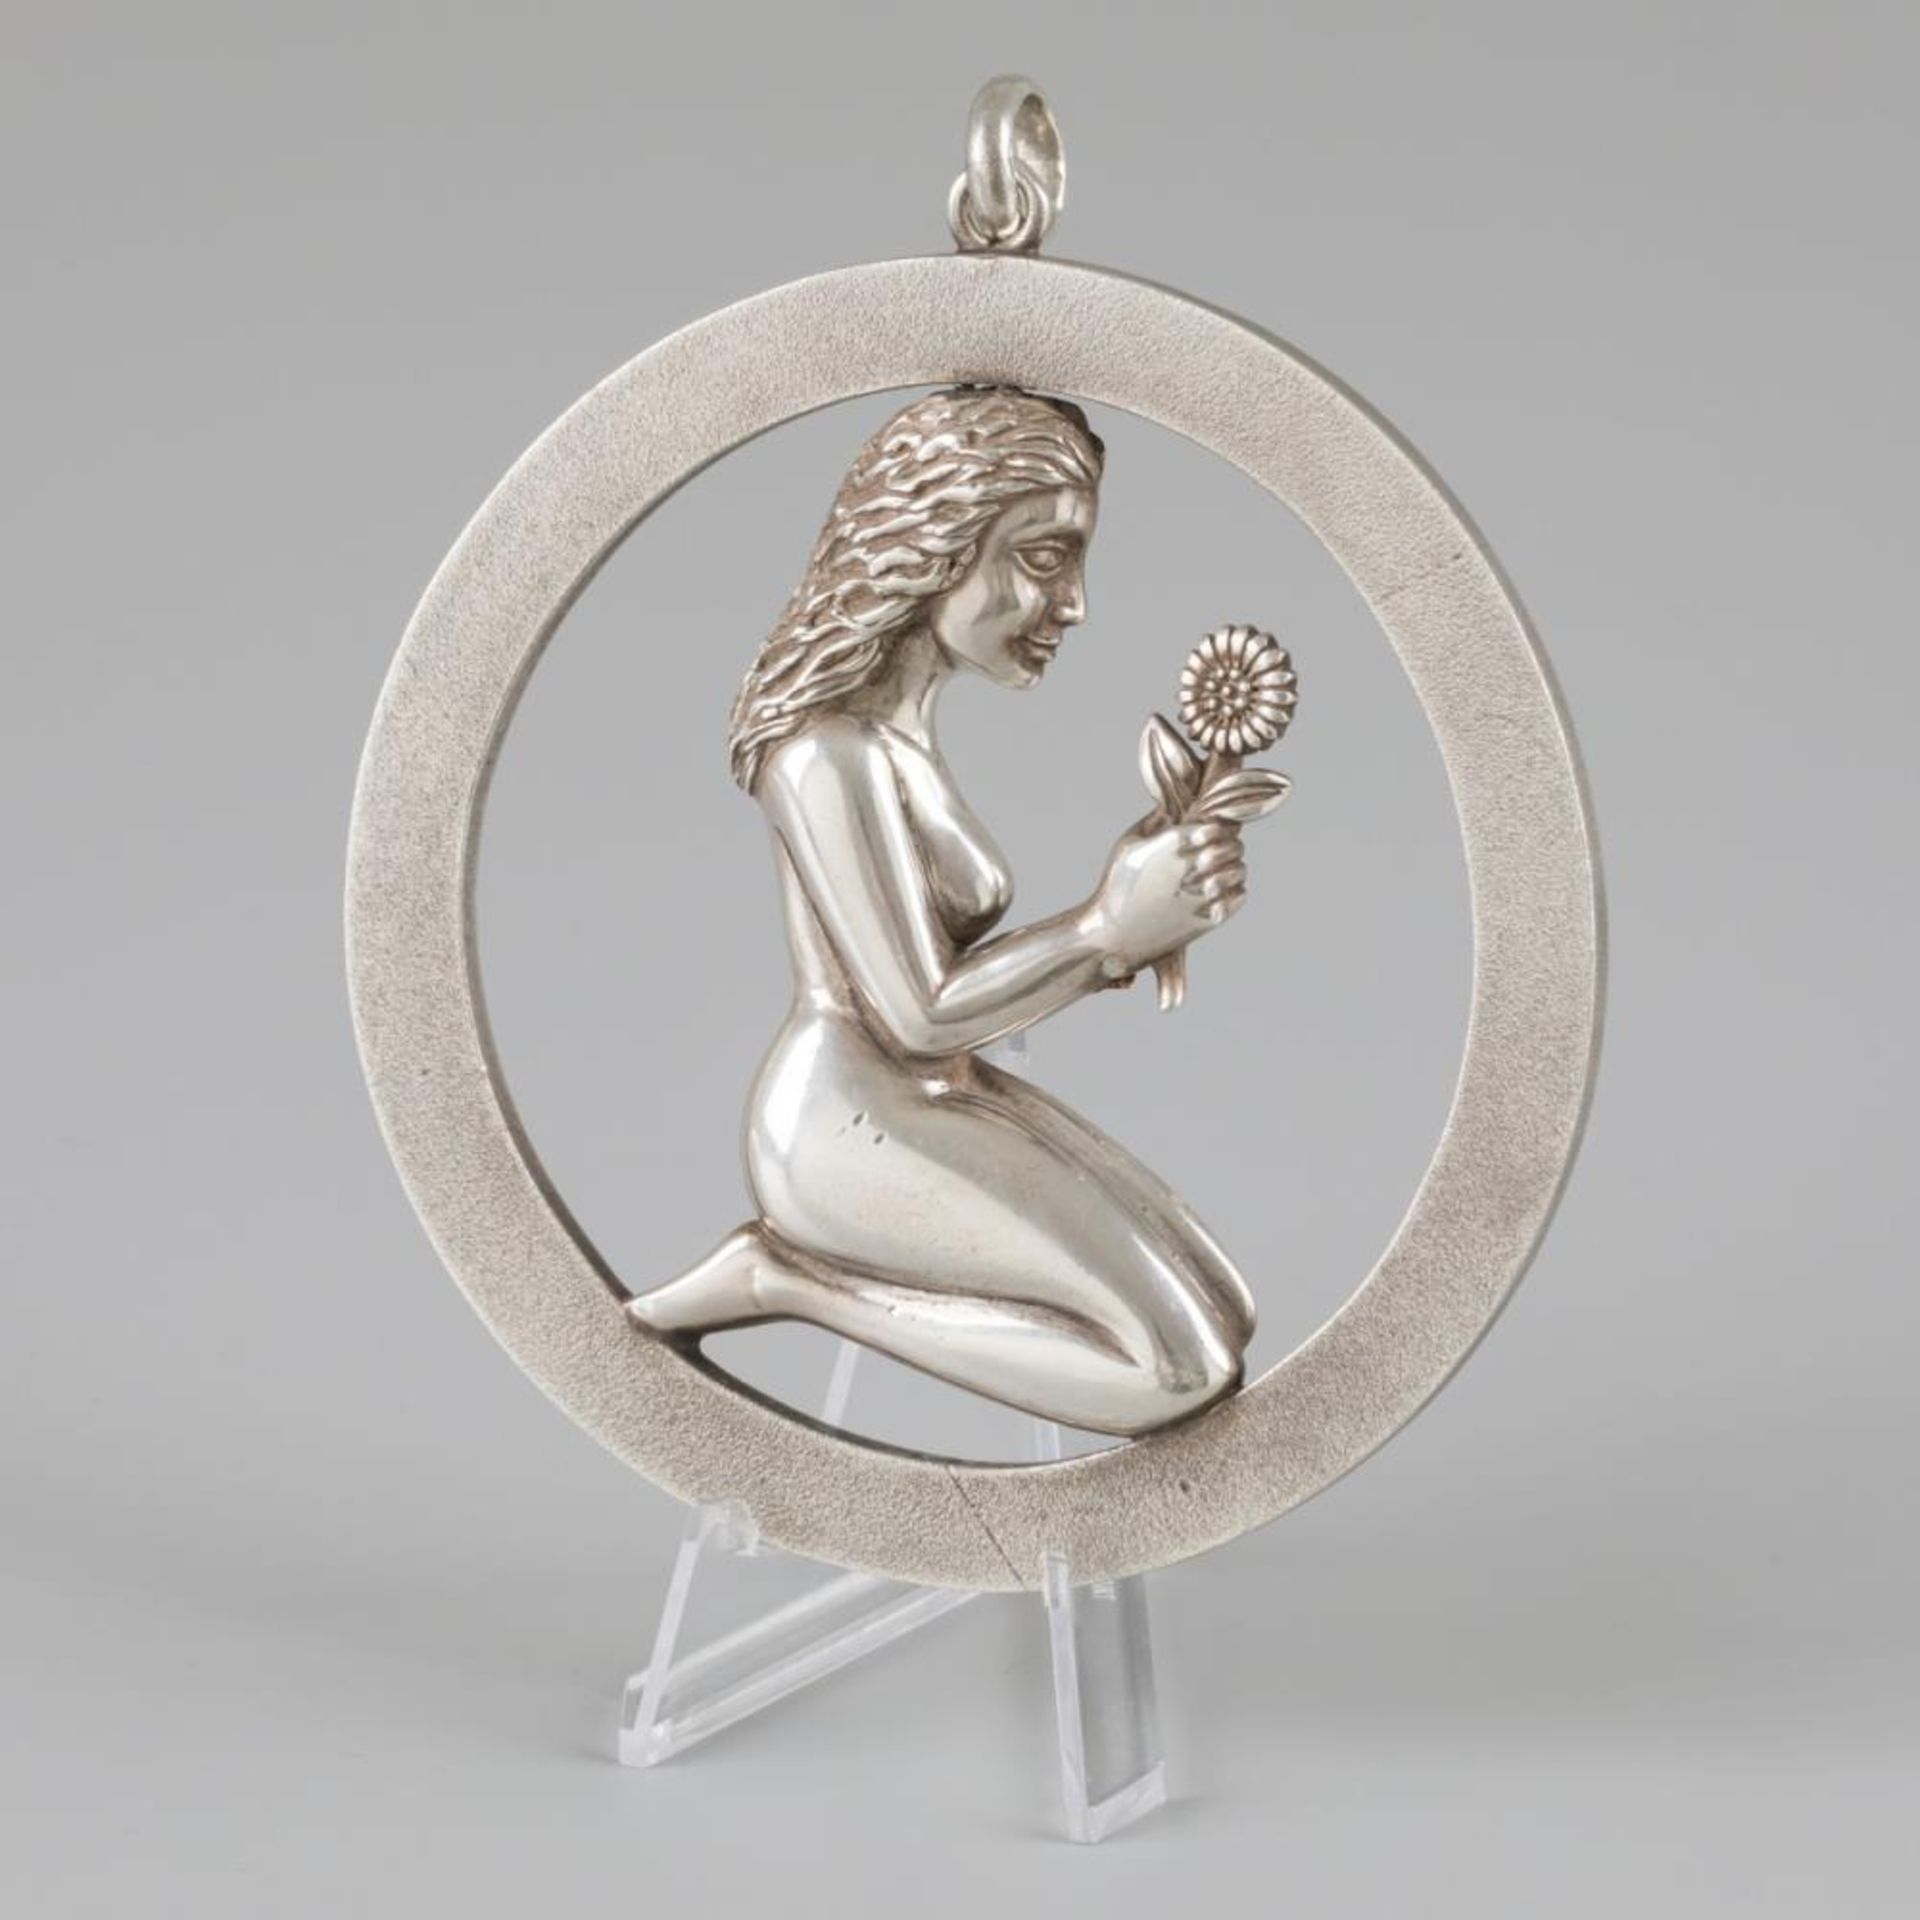 Pendant "lady with flower" silver.